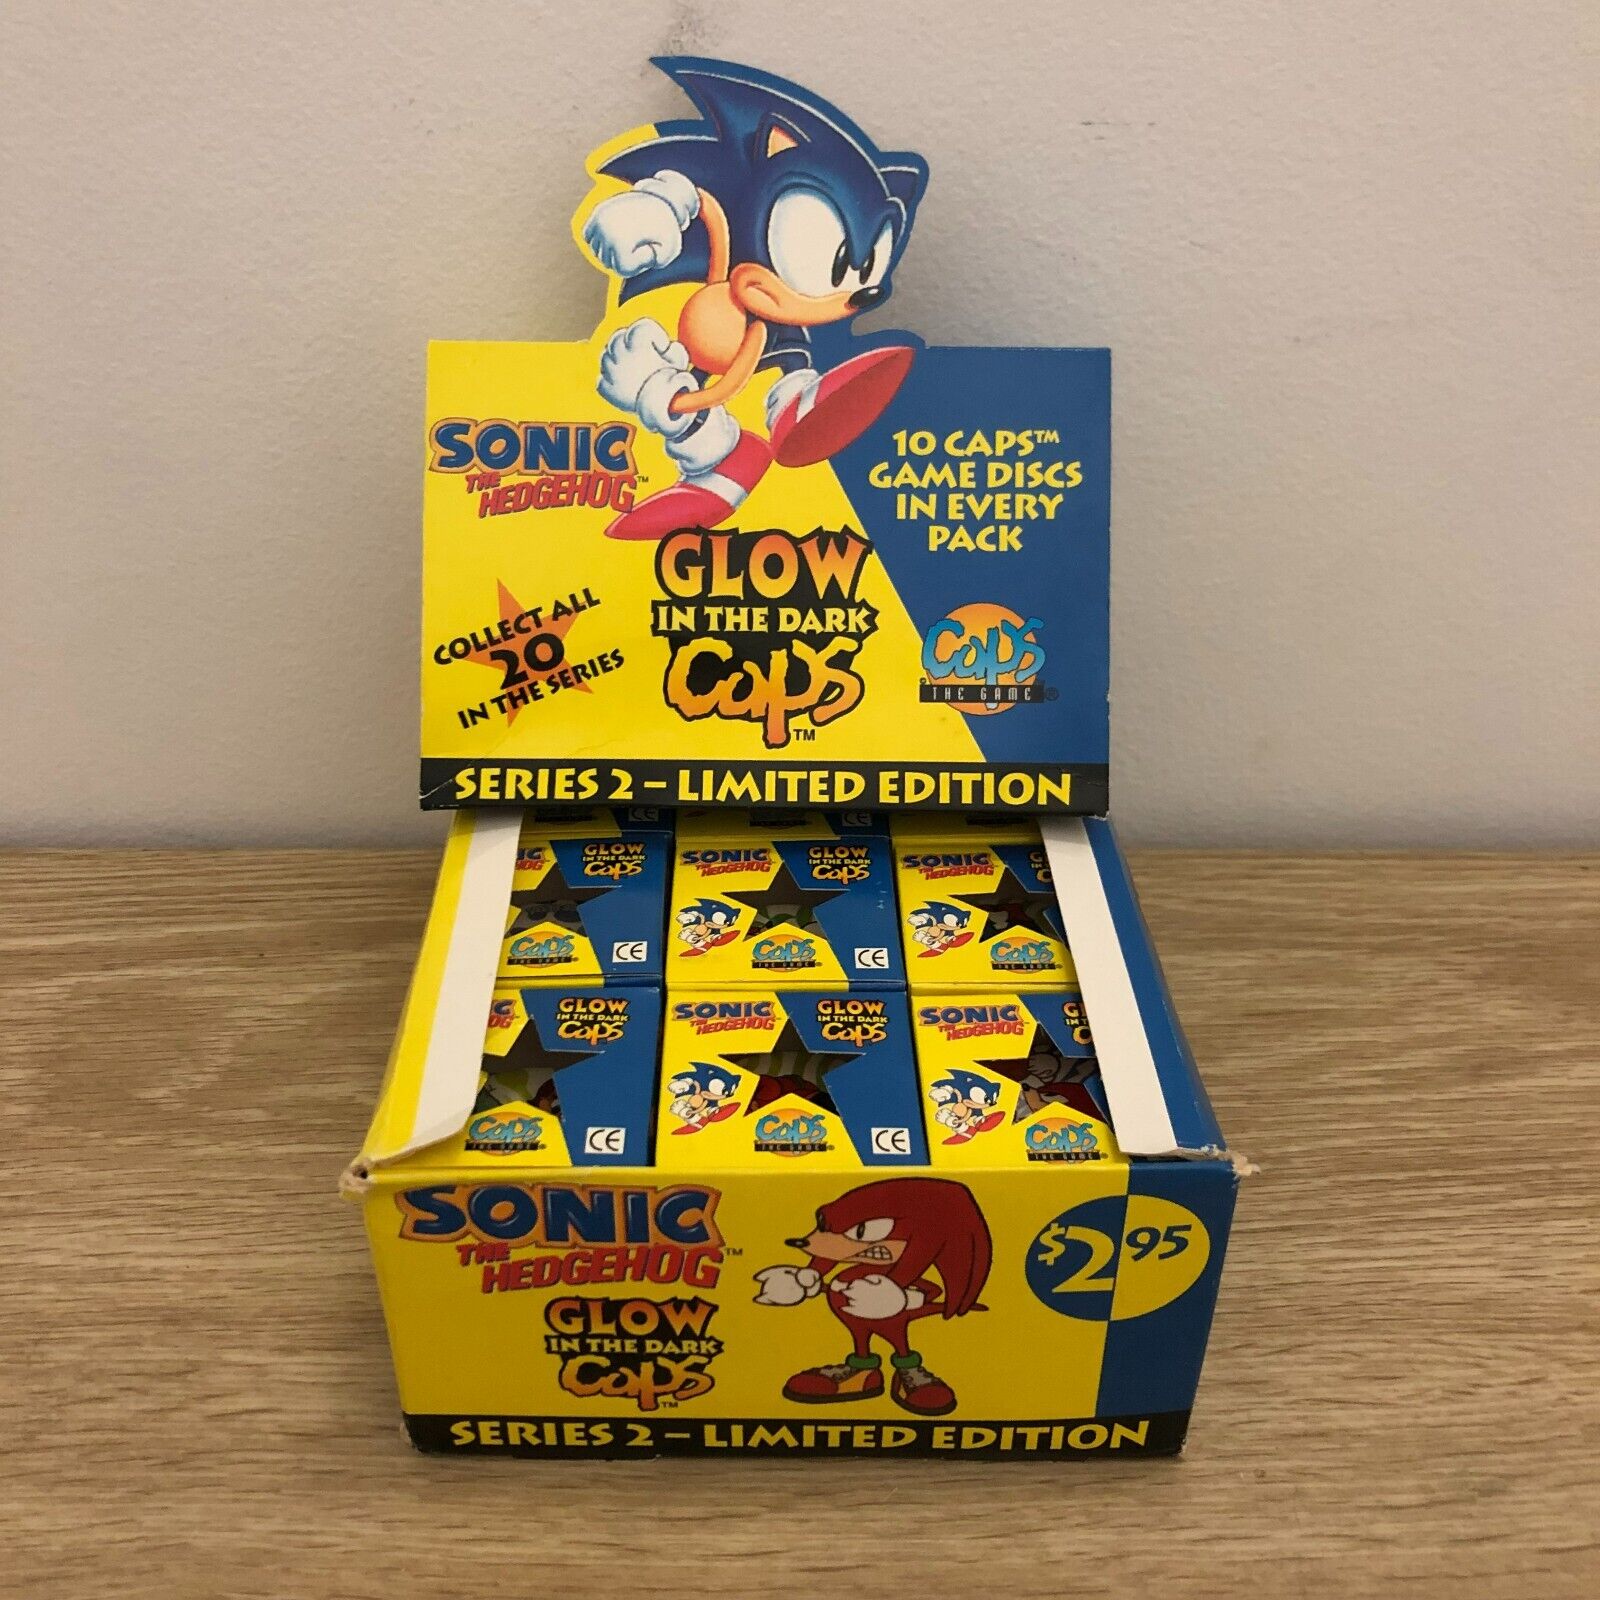 Sonic The Hedgehog Glow In The Dark Caps Vintage 1995 Caps The Game Unopened Box